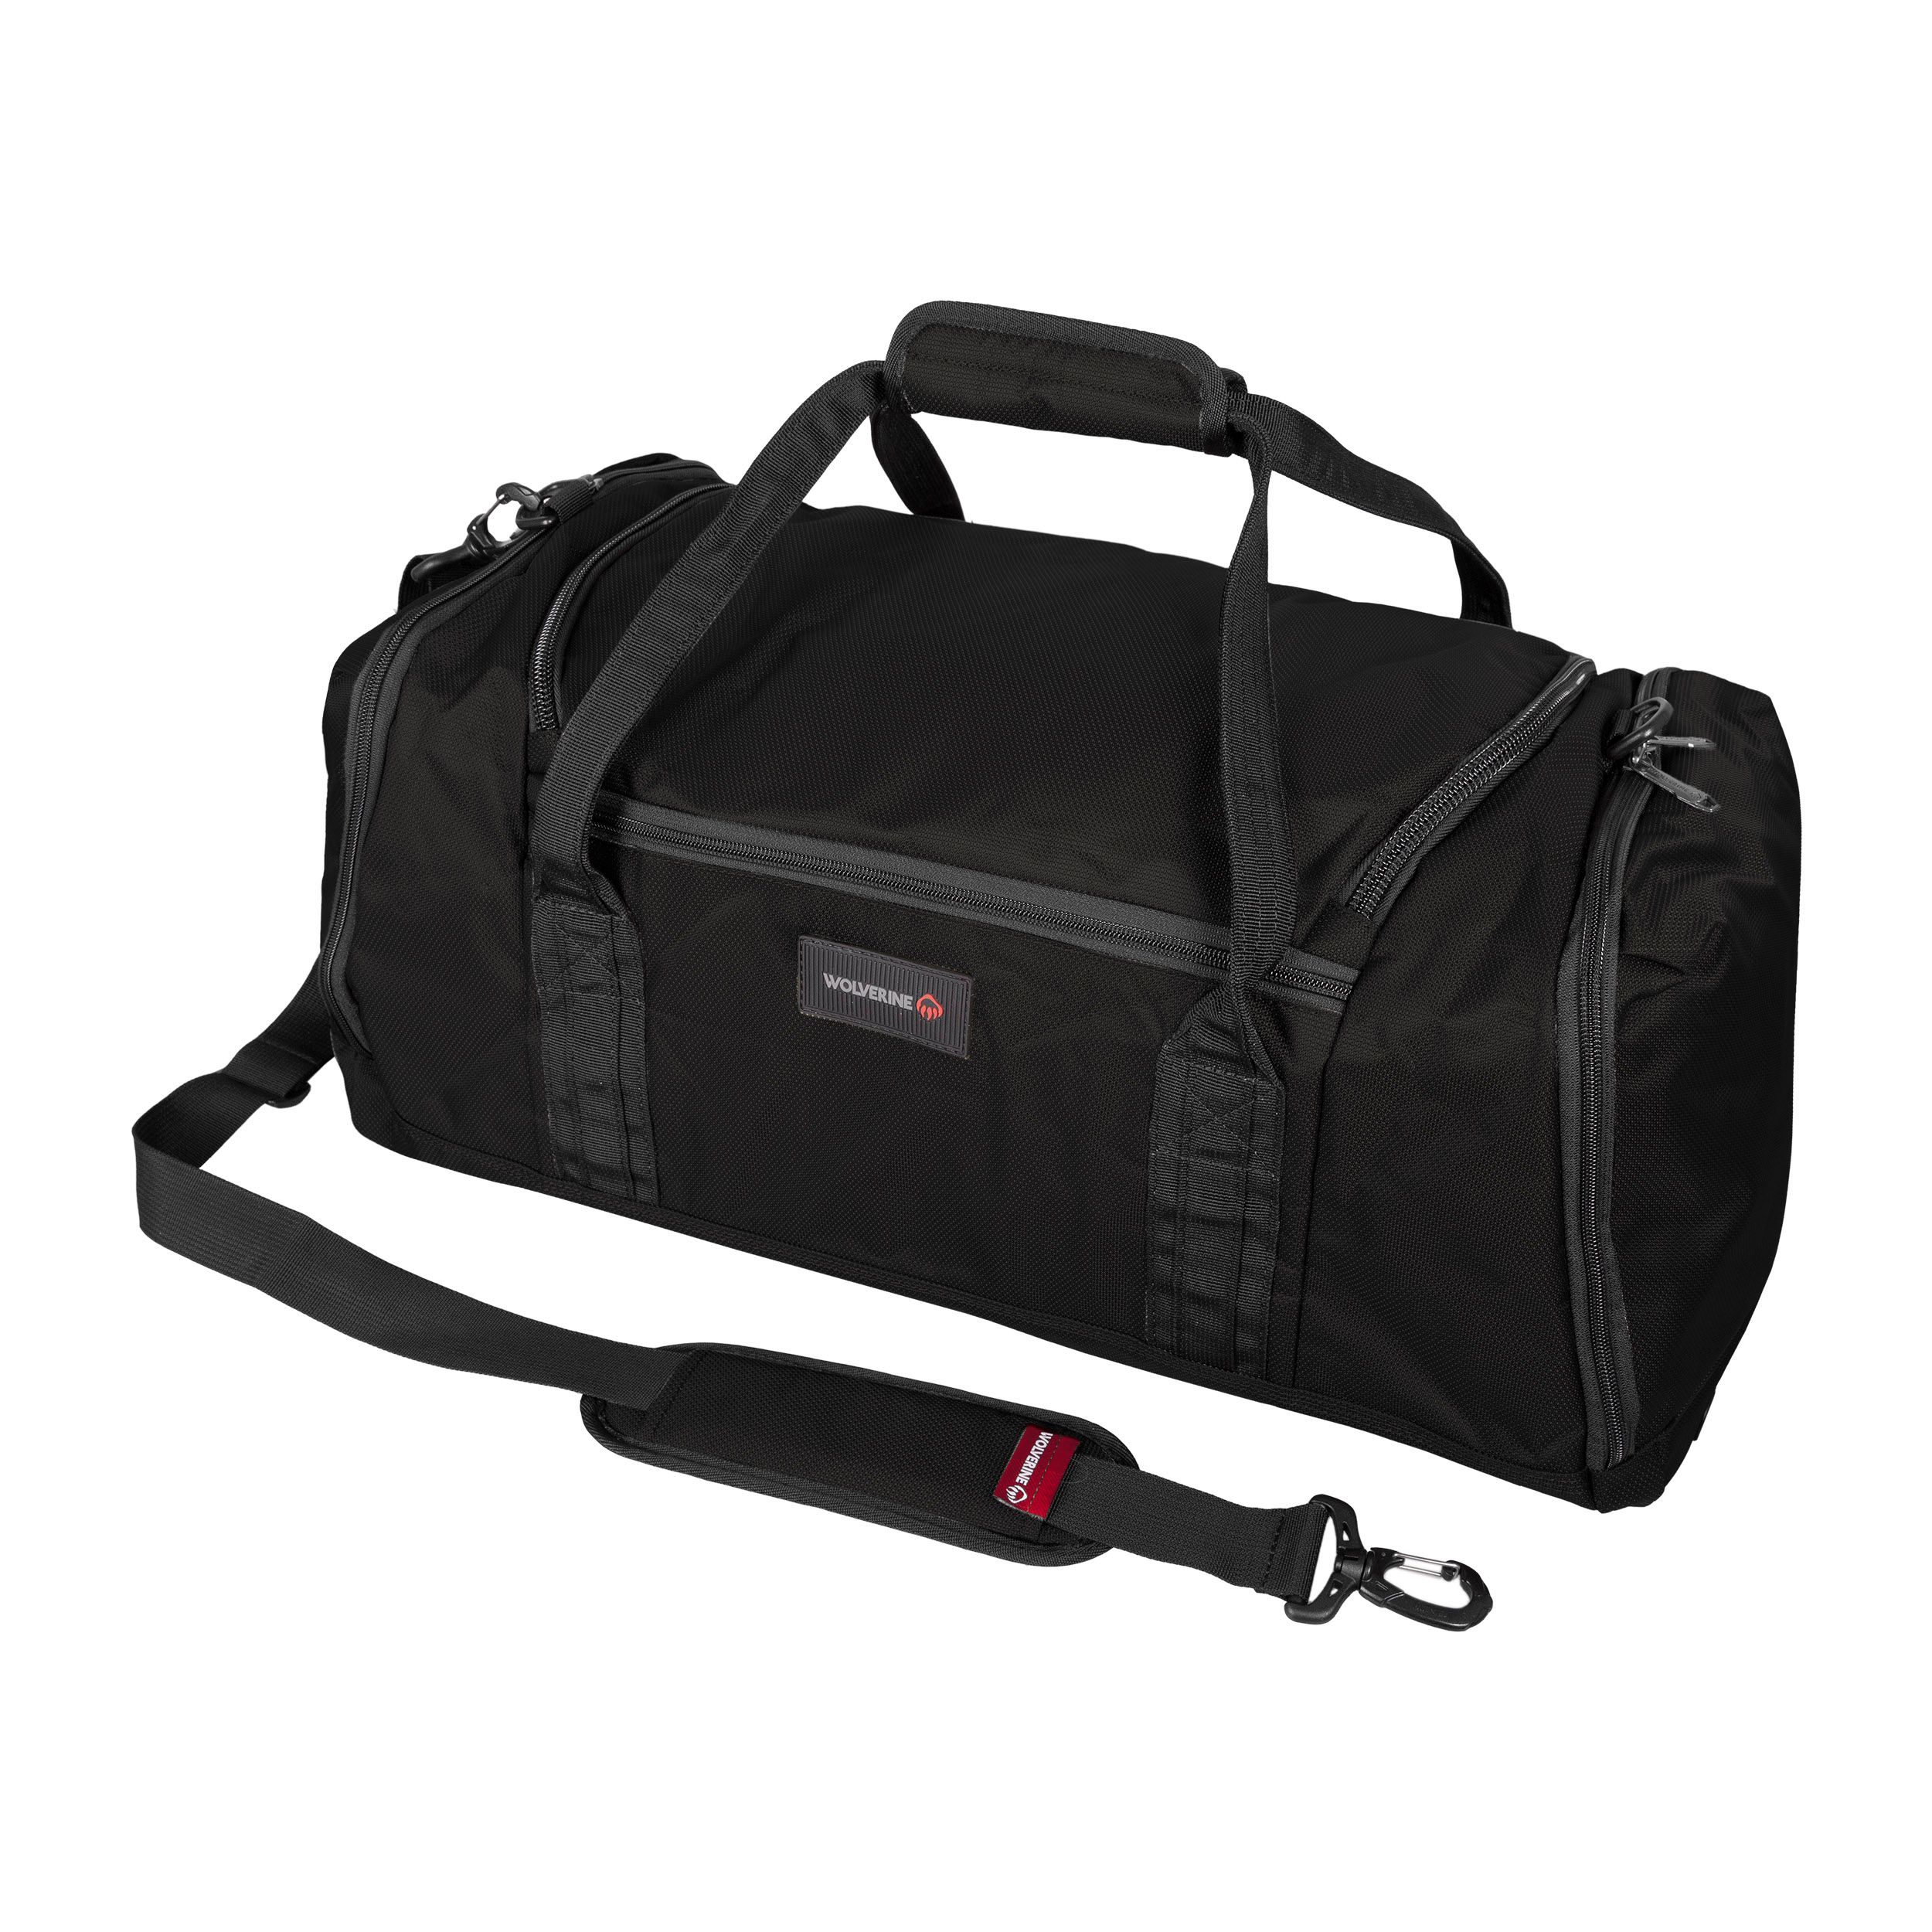 Wolverine 53L Bag with Boot |